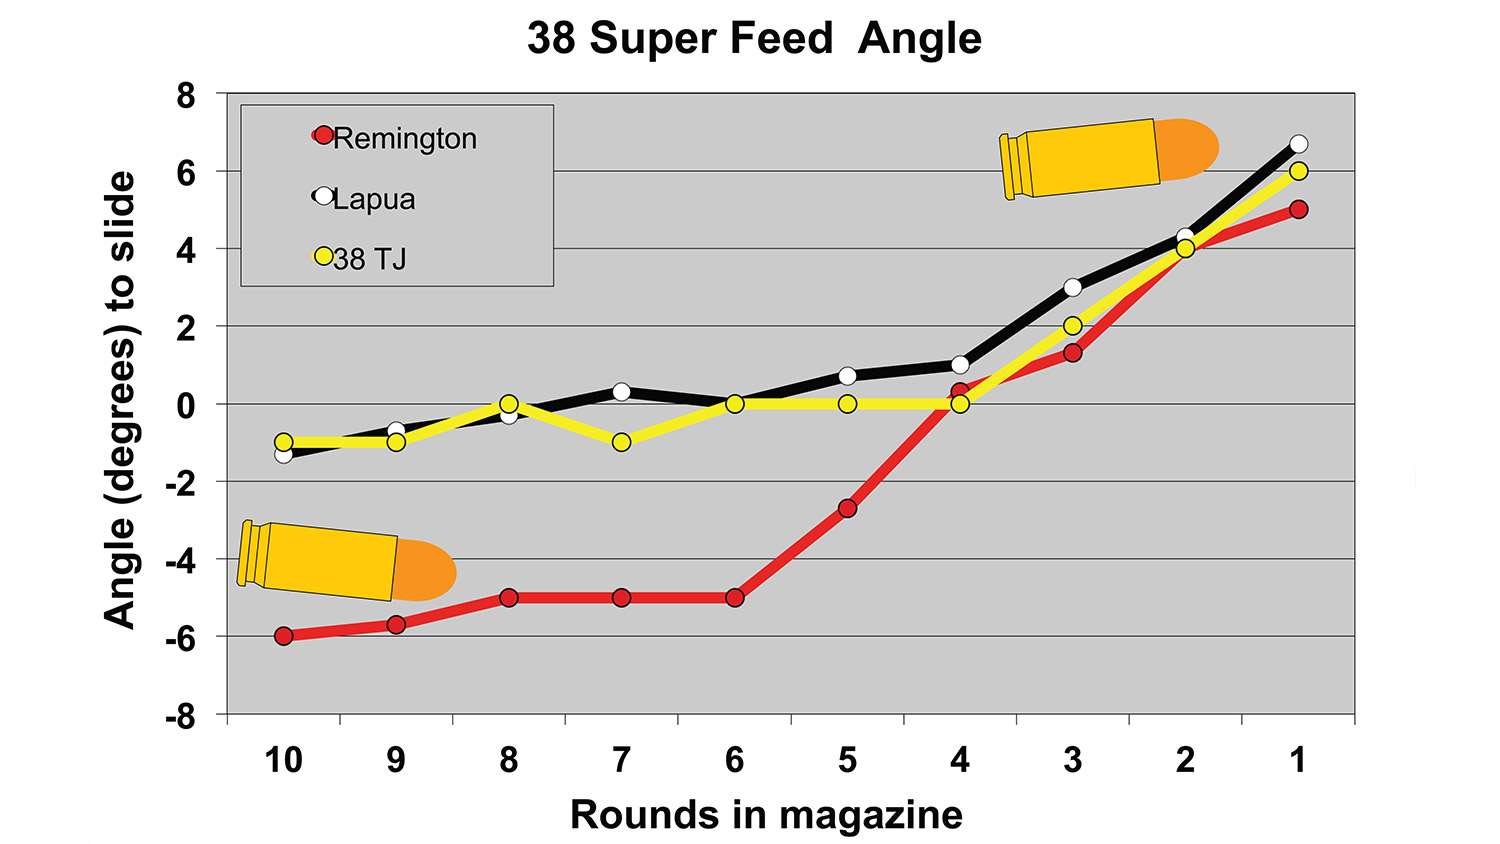 Feed angles of .38 Super ammo